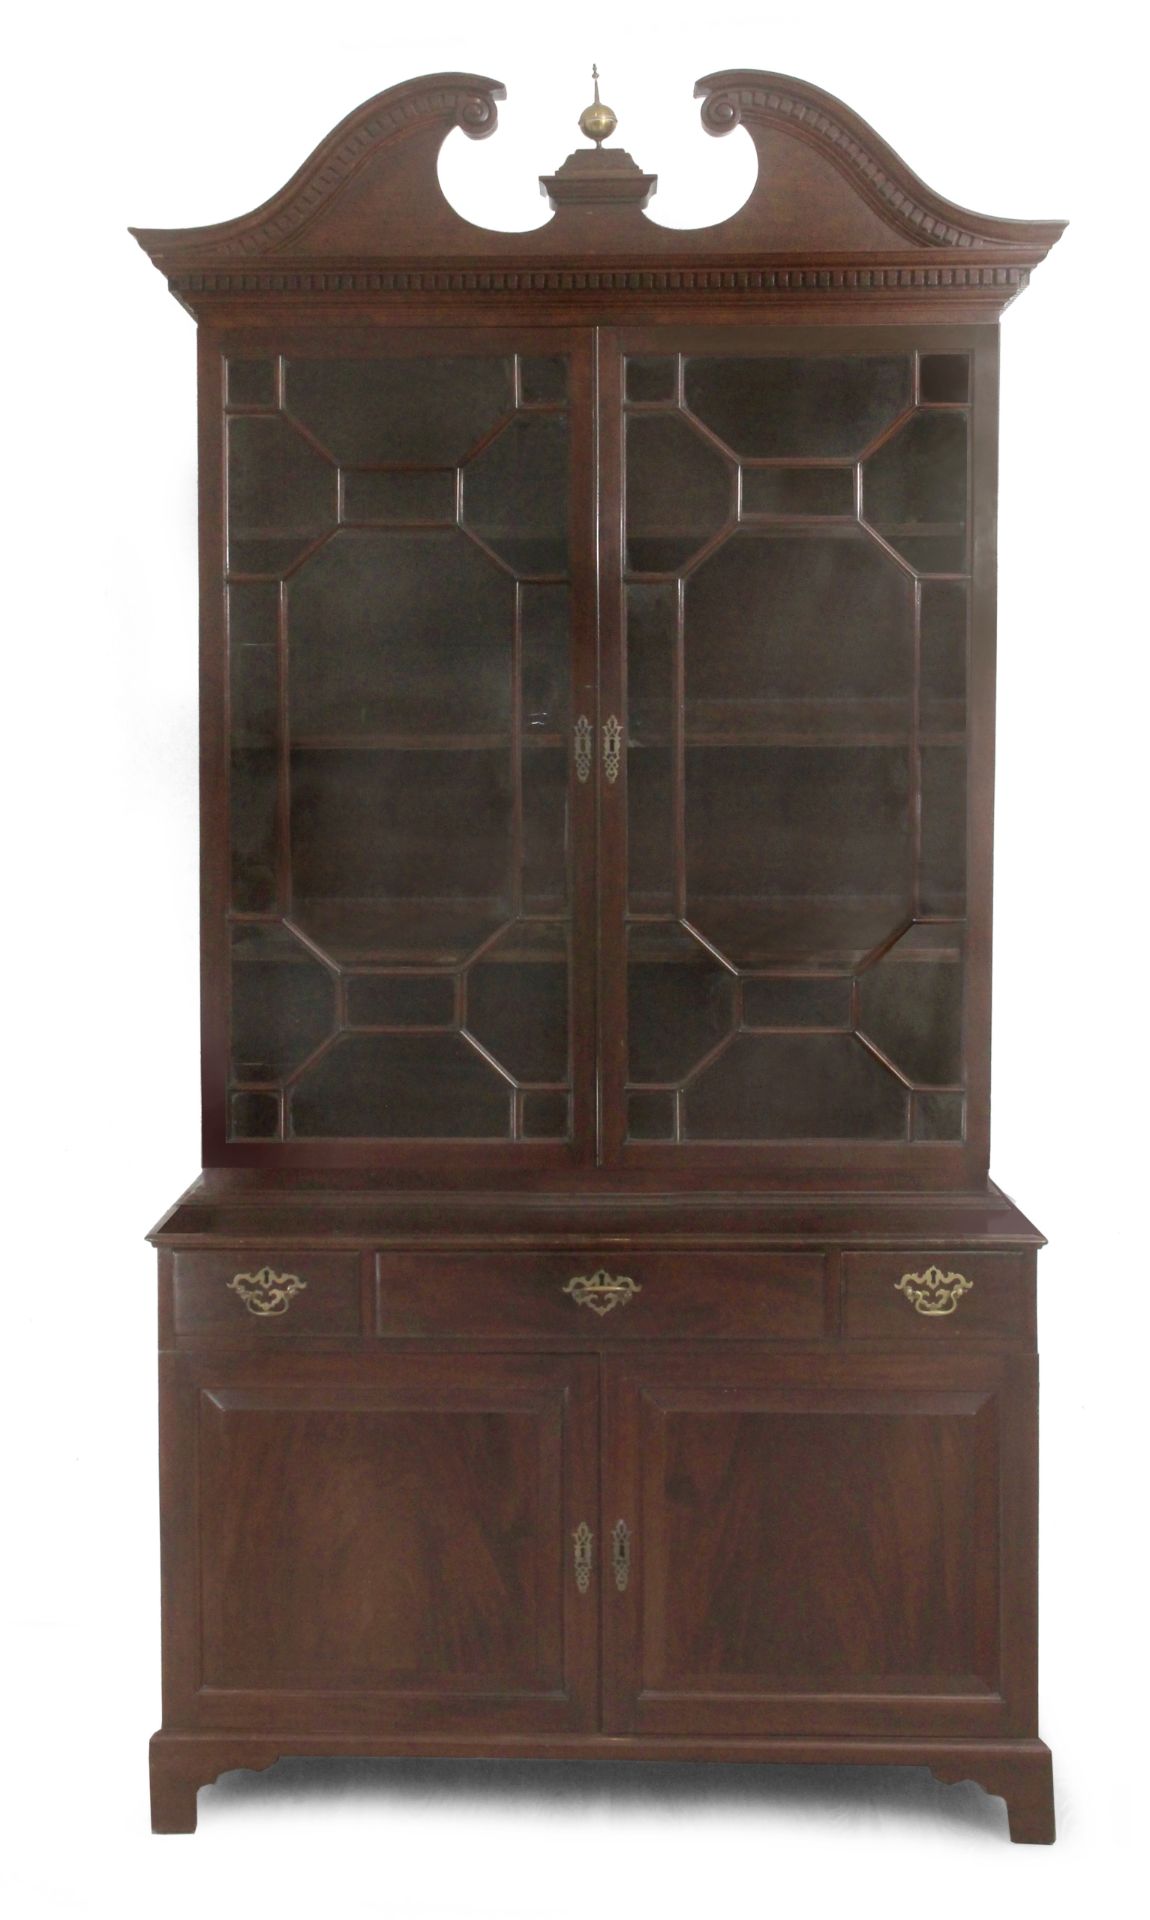 An early 19th century English mahogany writing bookcase desk from George IV period - Image 9 of 9